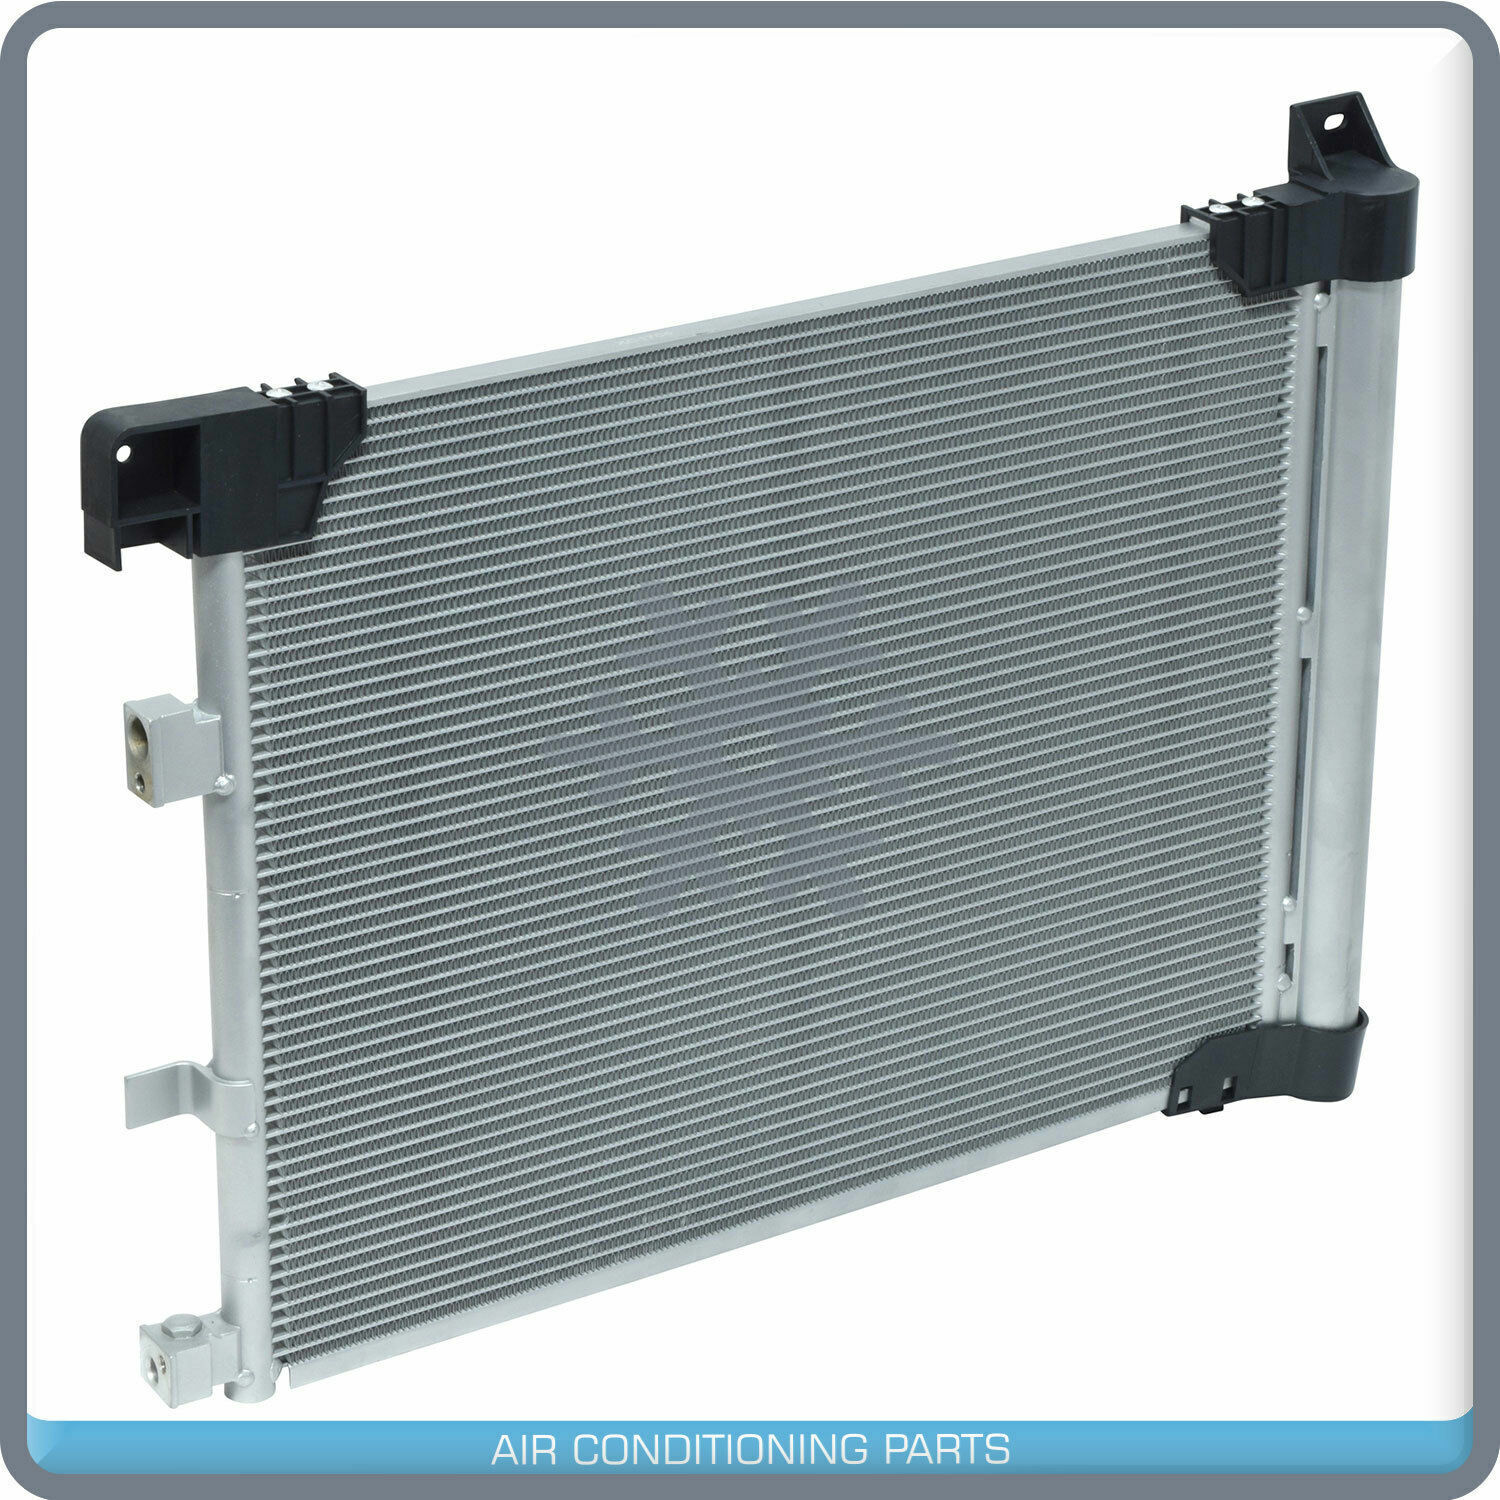 New A/C Condenser for Nissan Sentra - 2013 to 2019 - OE# 921003SH0A